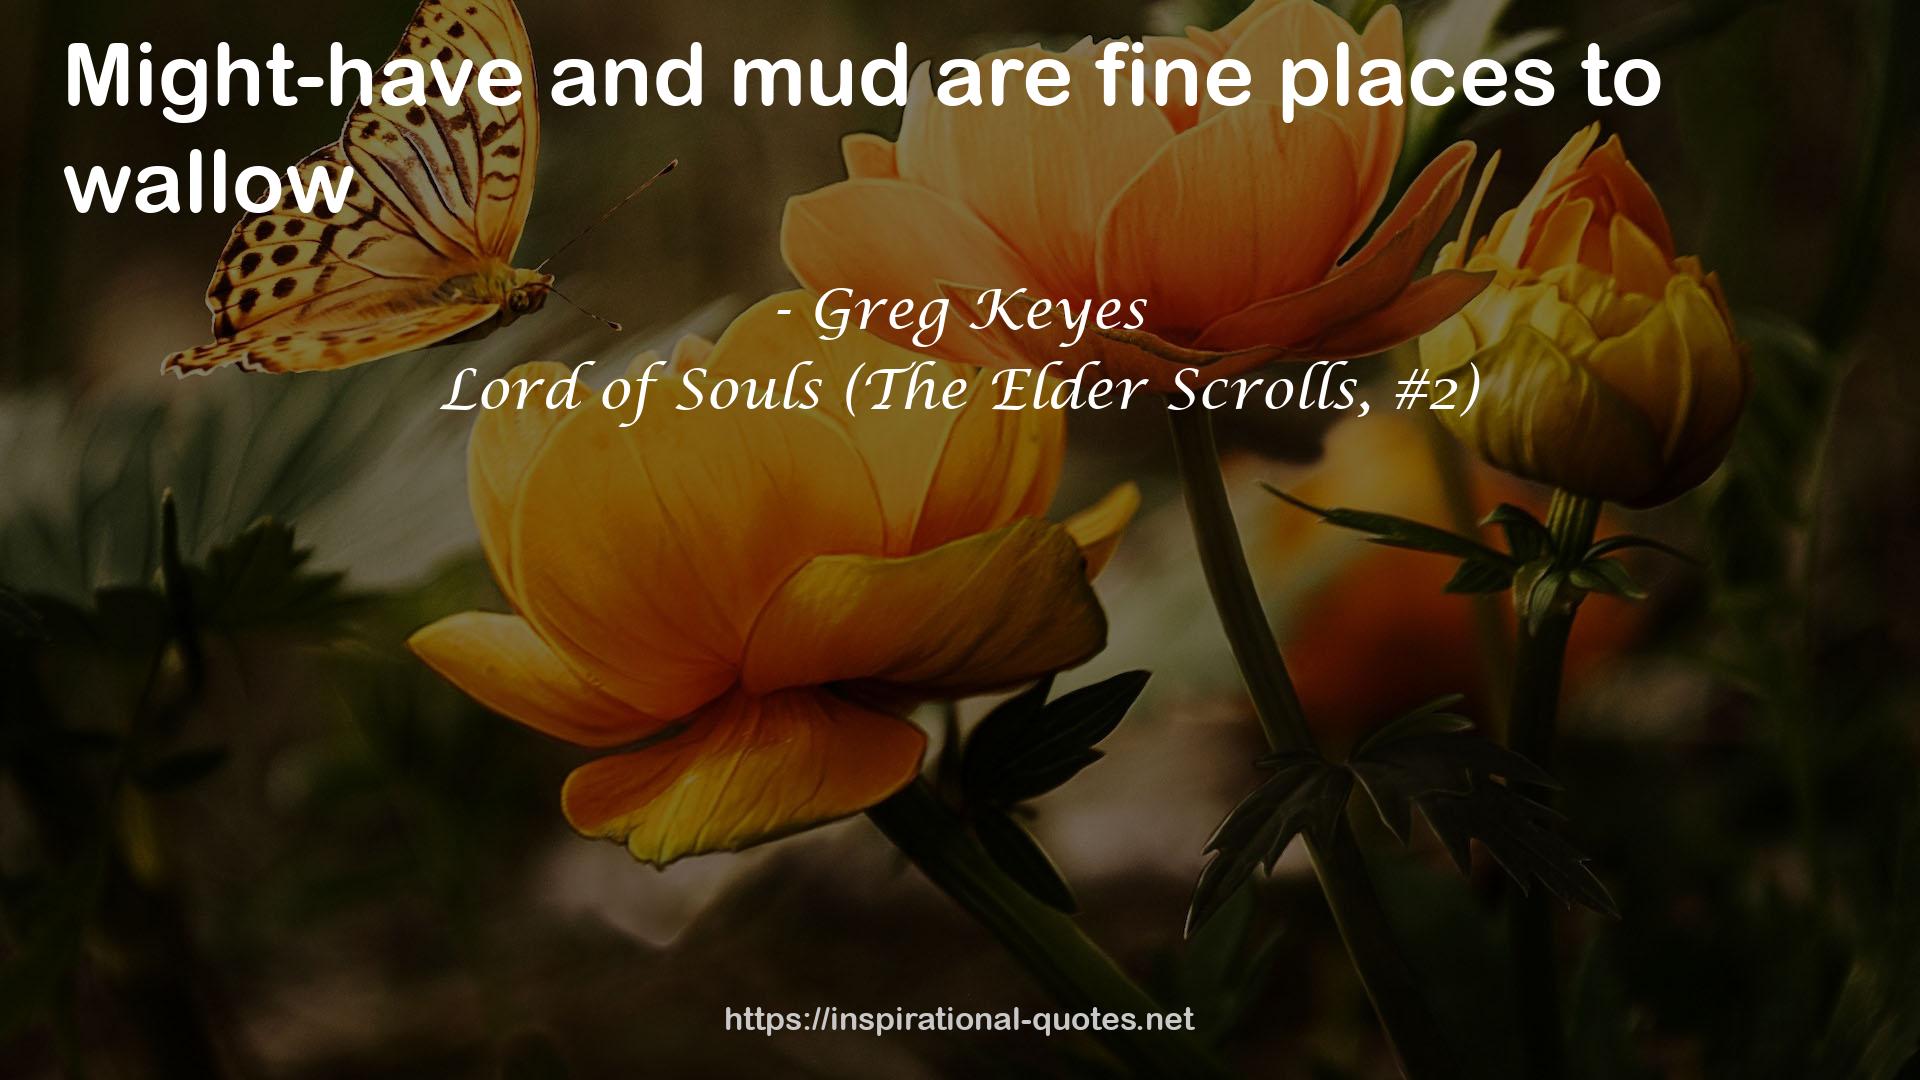 Lord of Souls (The Elder Scrolls, #2) QUOTES